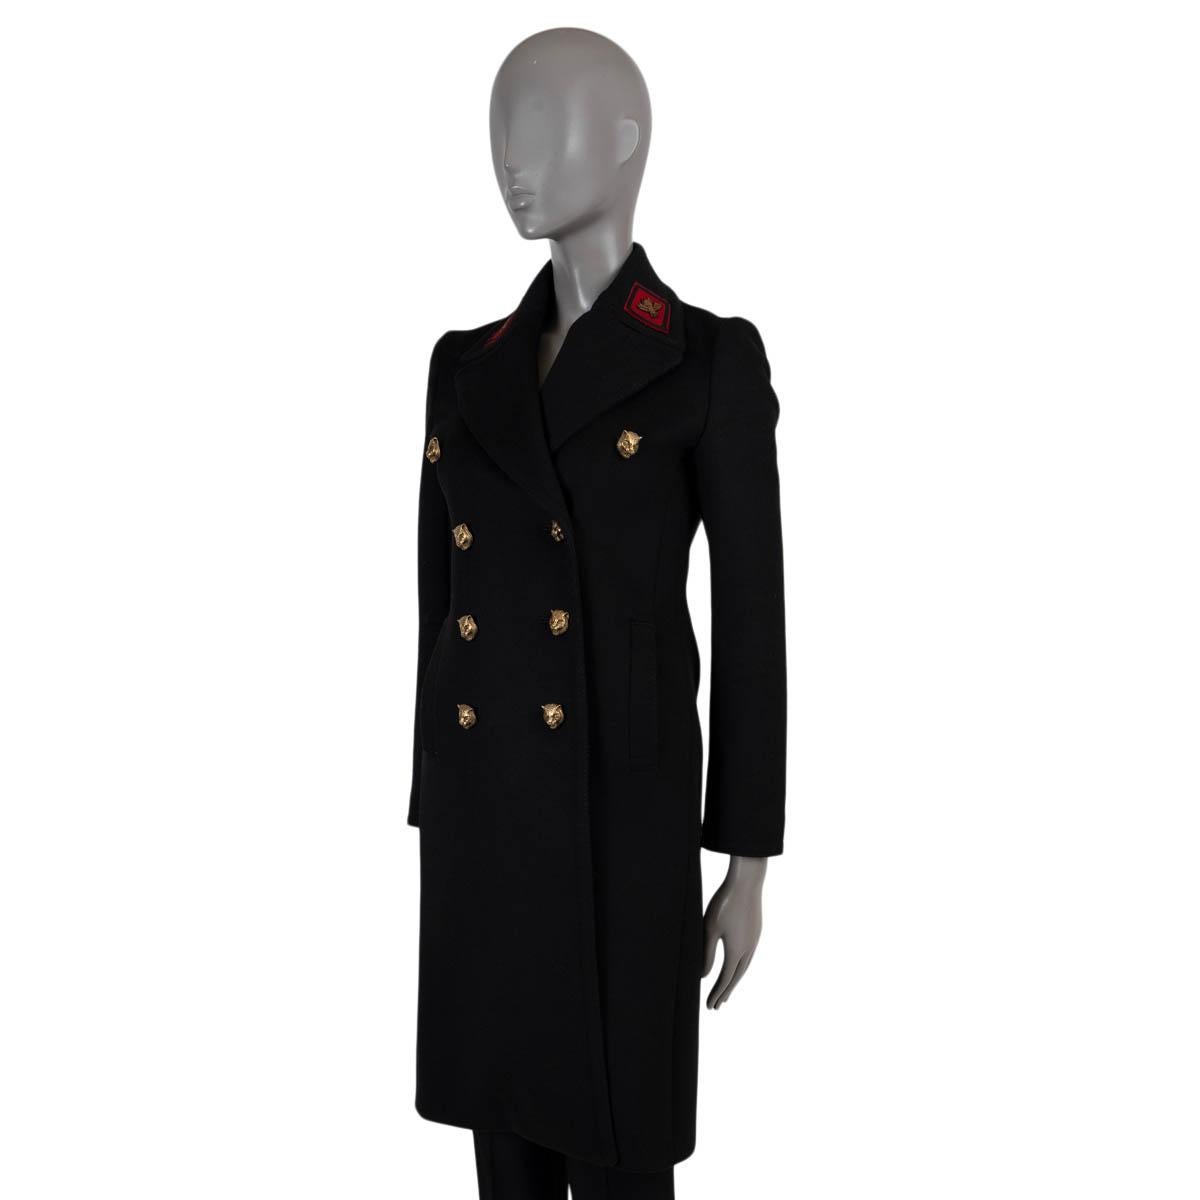 100% authentic Gucci peacoat in black wool (100%). Features large peak lapels with red bee embroidered patches, two slant pockets at the waist, a back belt with feline head buttons and L'Aveugle Par Amour and Snake embroidering on the back. Closes